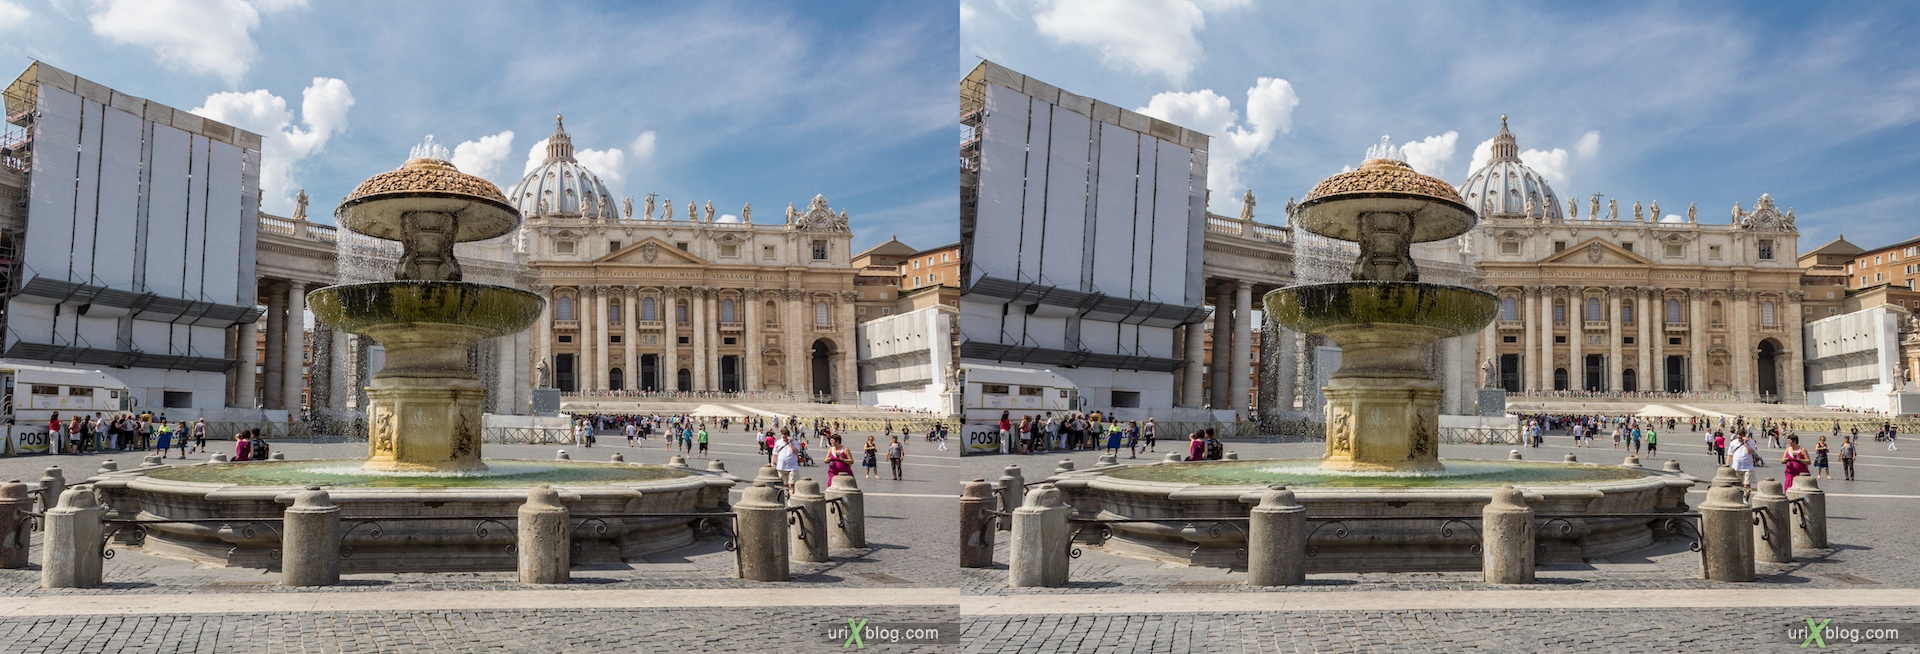 2012, southern fountain, Saint Peter's Basilica, square, Vatican, Rome, Italy, 3D, stereo pair, cross-eyed, crossview, cross view stereo pair